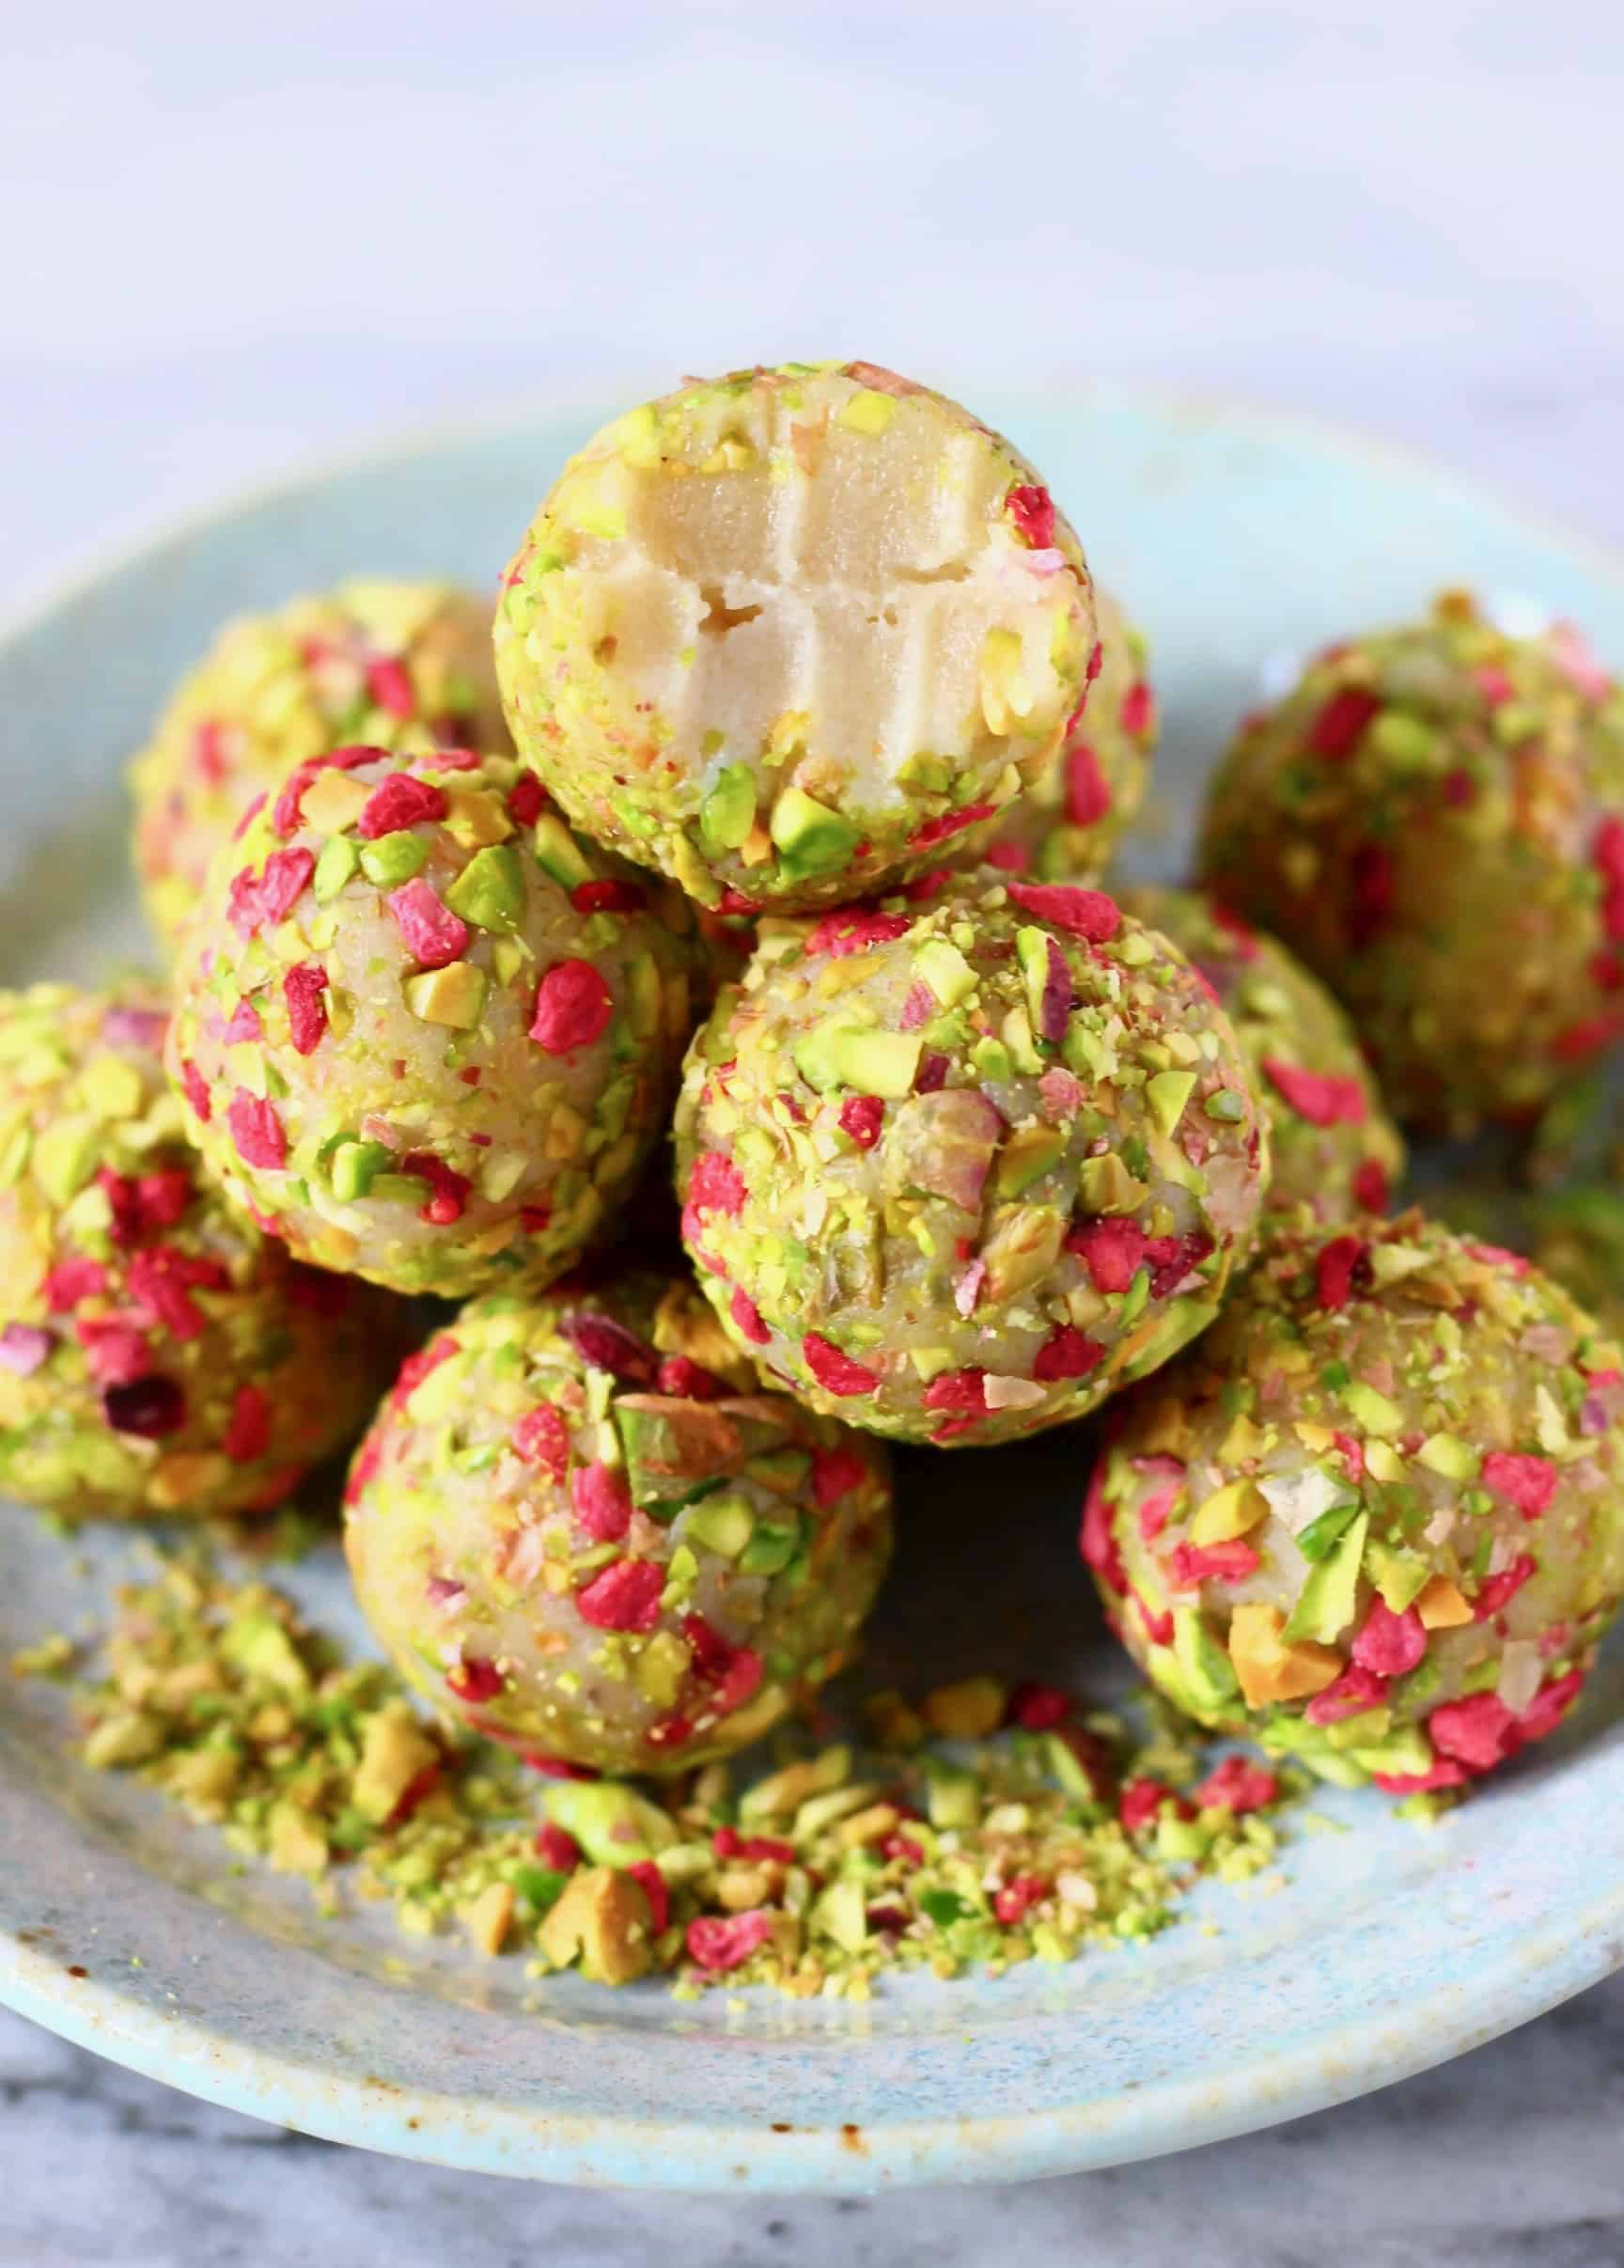 A pile of white chocolate truffles covered with chopped pistachios and freeze-dried raspberries with a bite taken out of one